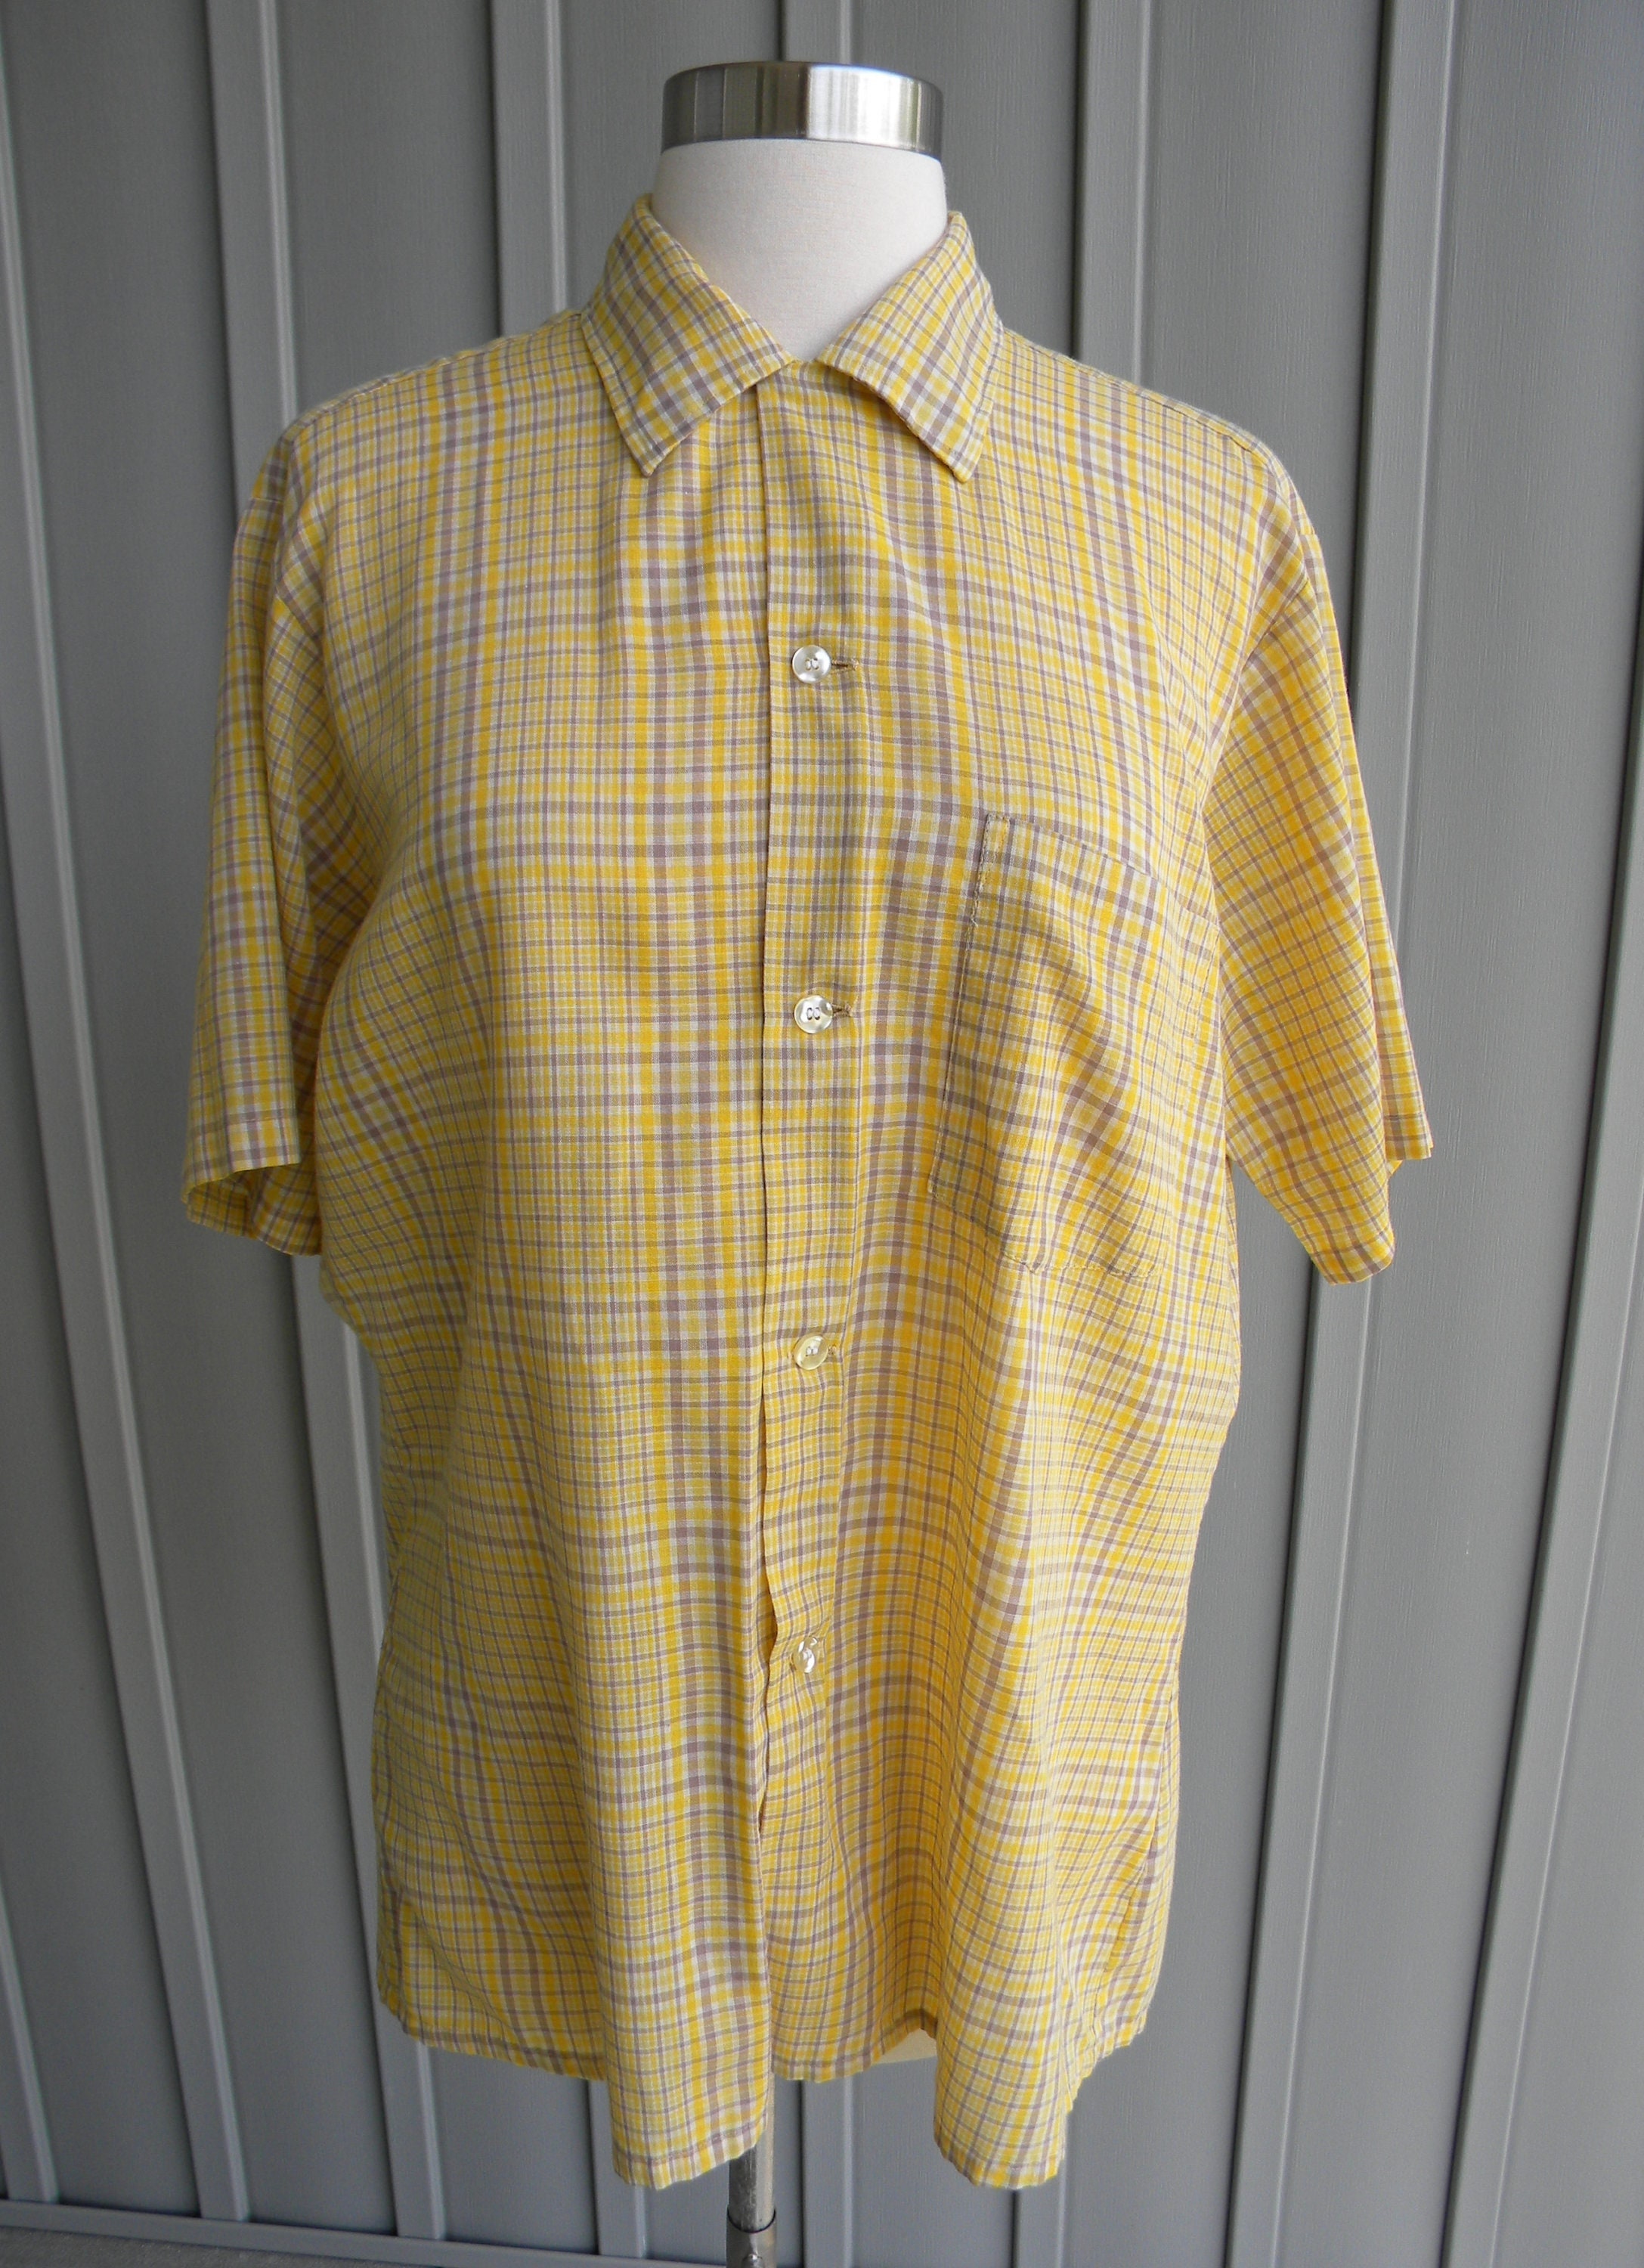 Clothing Mens Clothing Shirts & Tees Oxfords & Button Downs Vintage Golden Arrow men’s ultressa terracotta with white polka dots pointed collar vintage disco shirt short sleeved 70’s shirt size 15.5” 